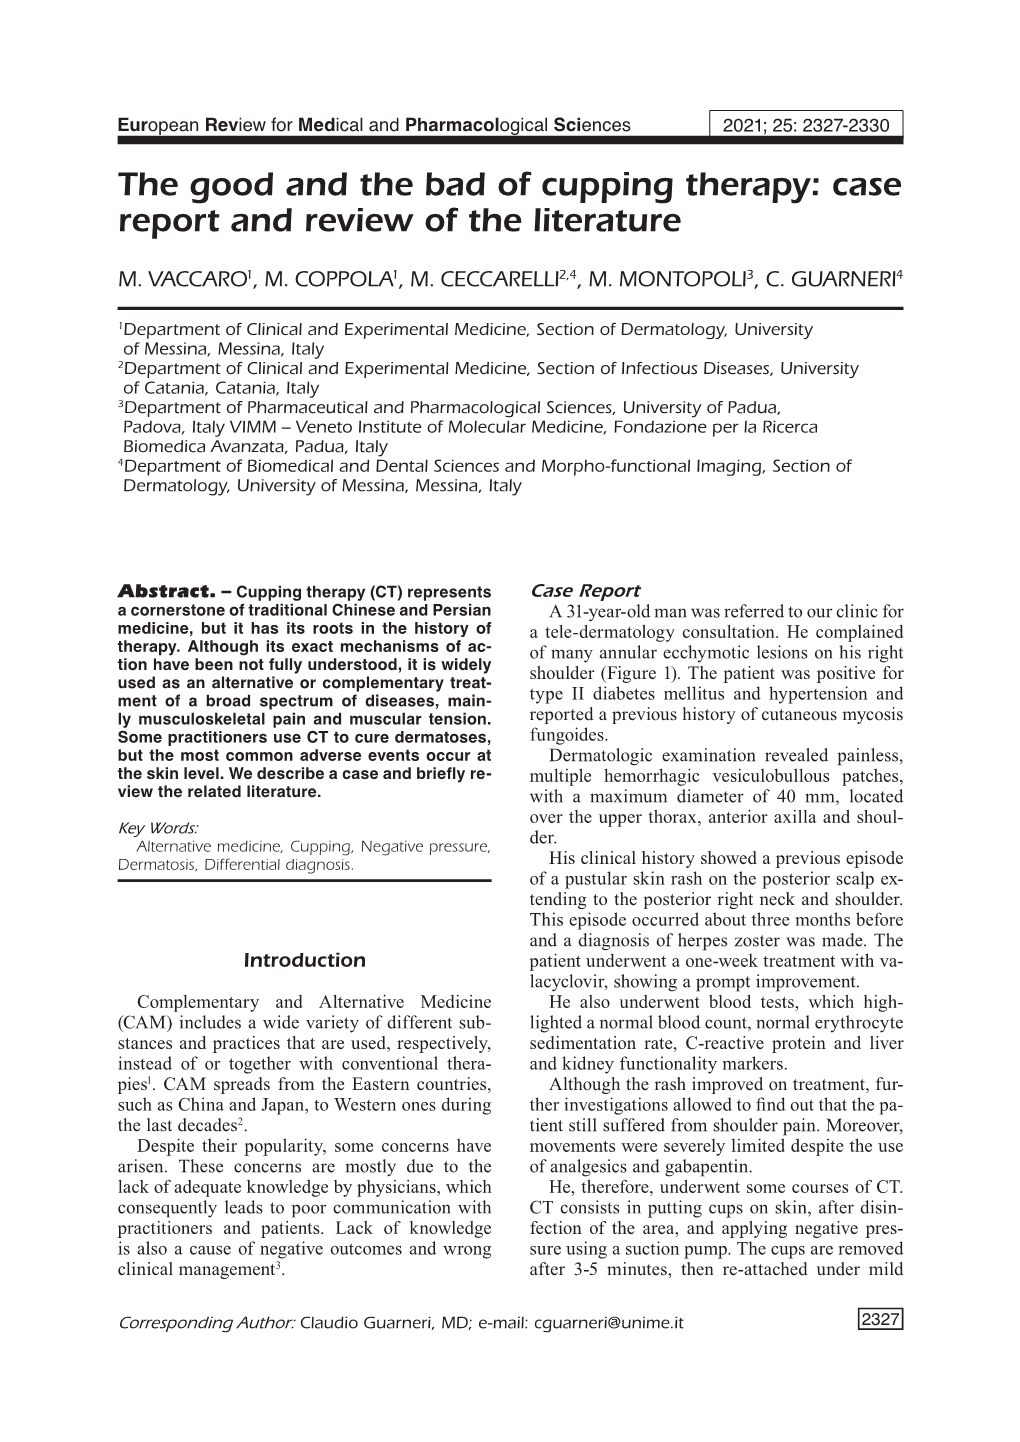 The Good and the Bad of Cupping Therapy: Case Report and Review of the Literature